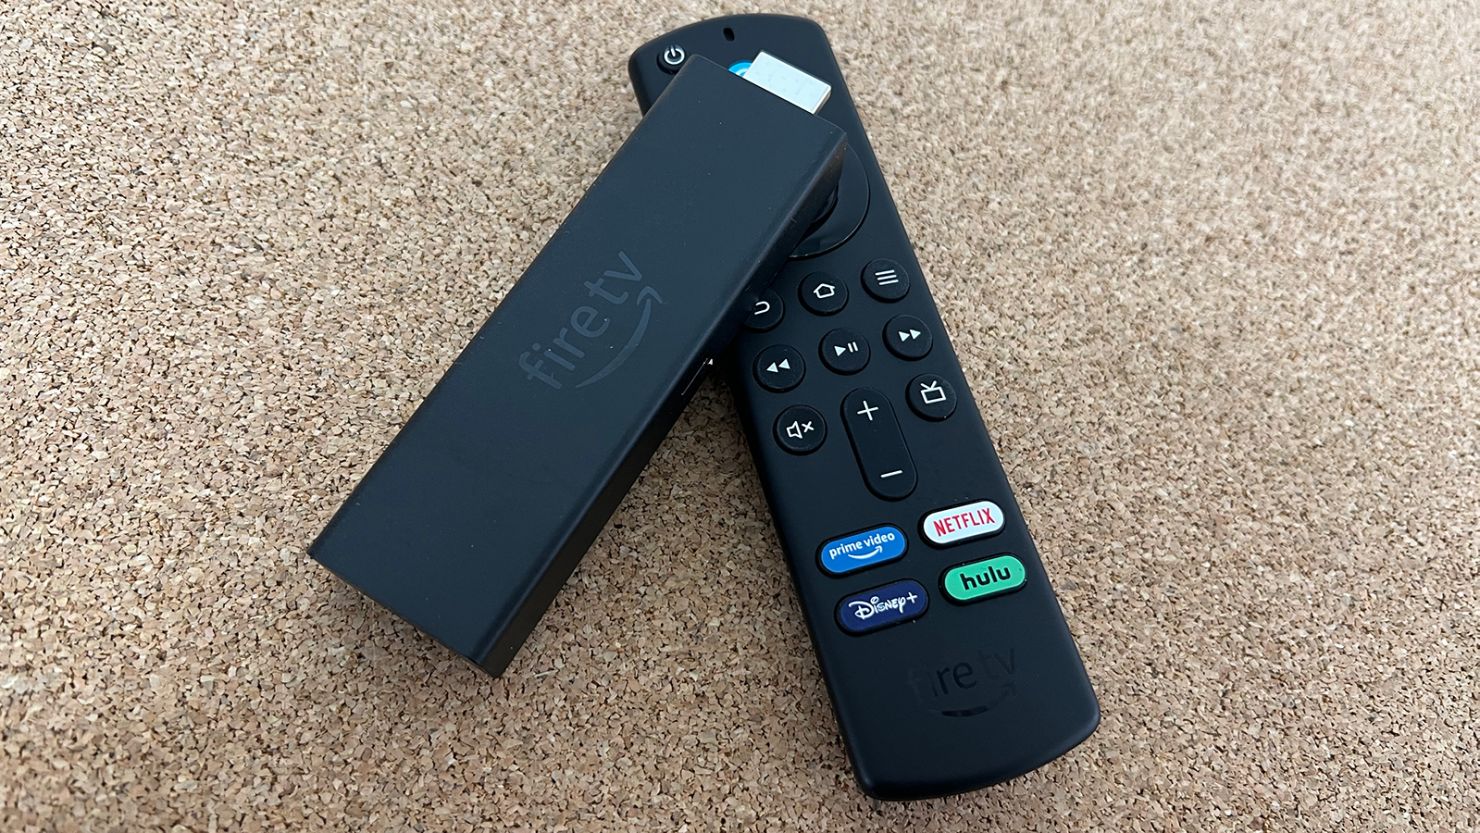 Fire TV Stick 4K Max review: What's really Max about it?